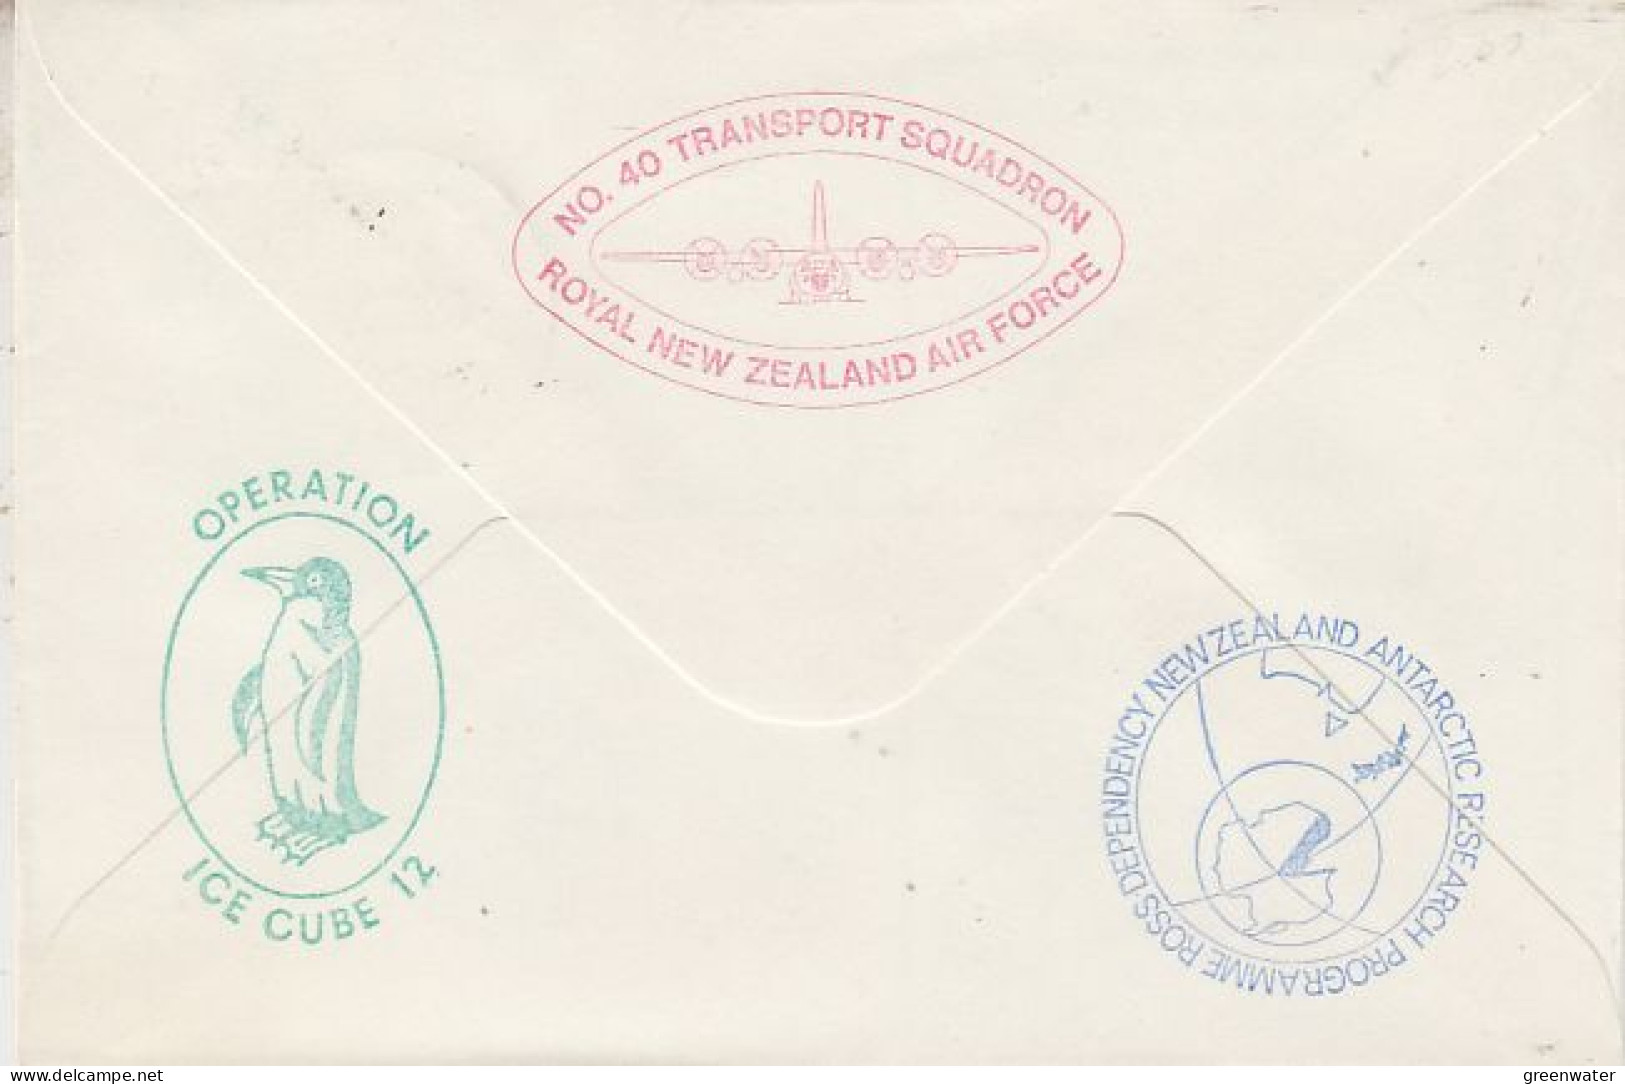 Ross Dependency 1976 Operation Icecube 12 Signature  Ca Scott Base 6 DEC 1976  (RT198) - Covers & Documents